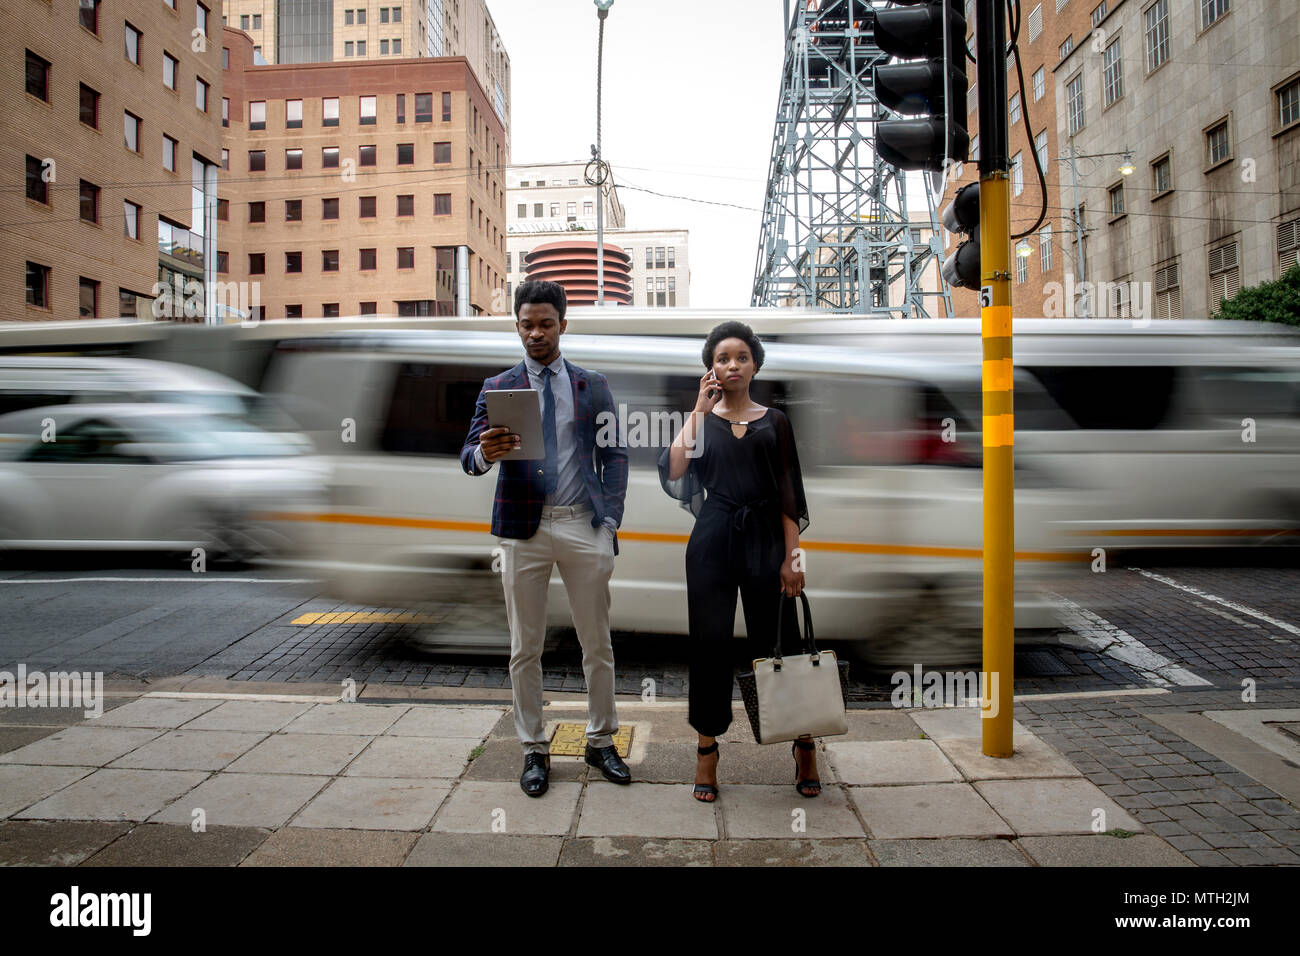 Business man and woman waiting at traffic light Stock Photo